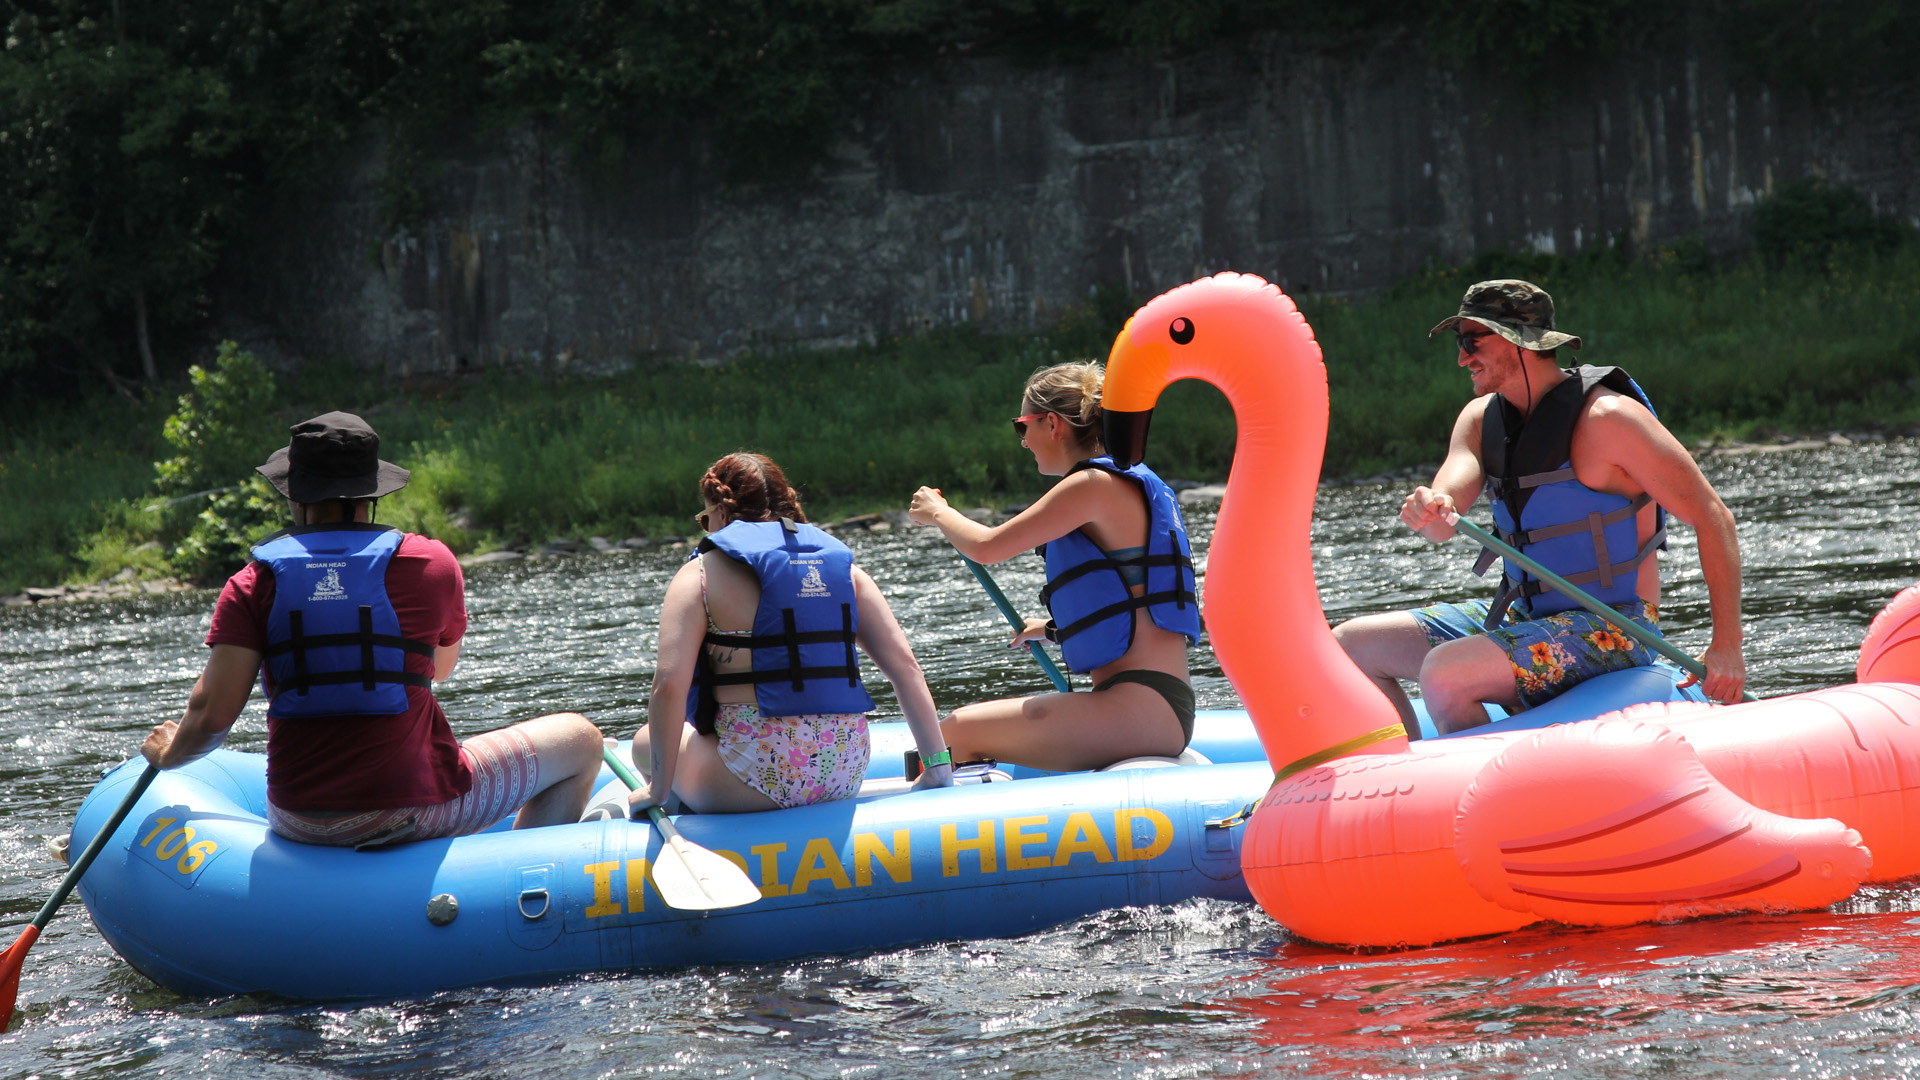 man in flamingo raft coming up on unsuspecting rafters Indian Head Canoeing Rafting Kayaking Tubing Delaware River